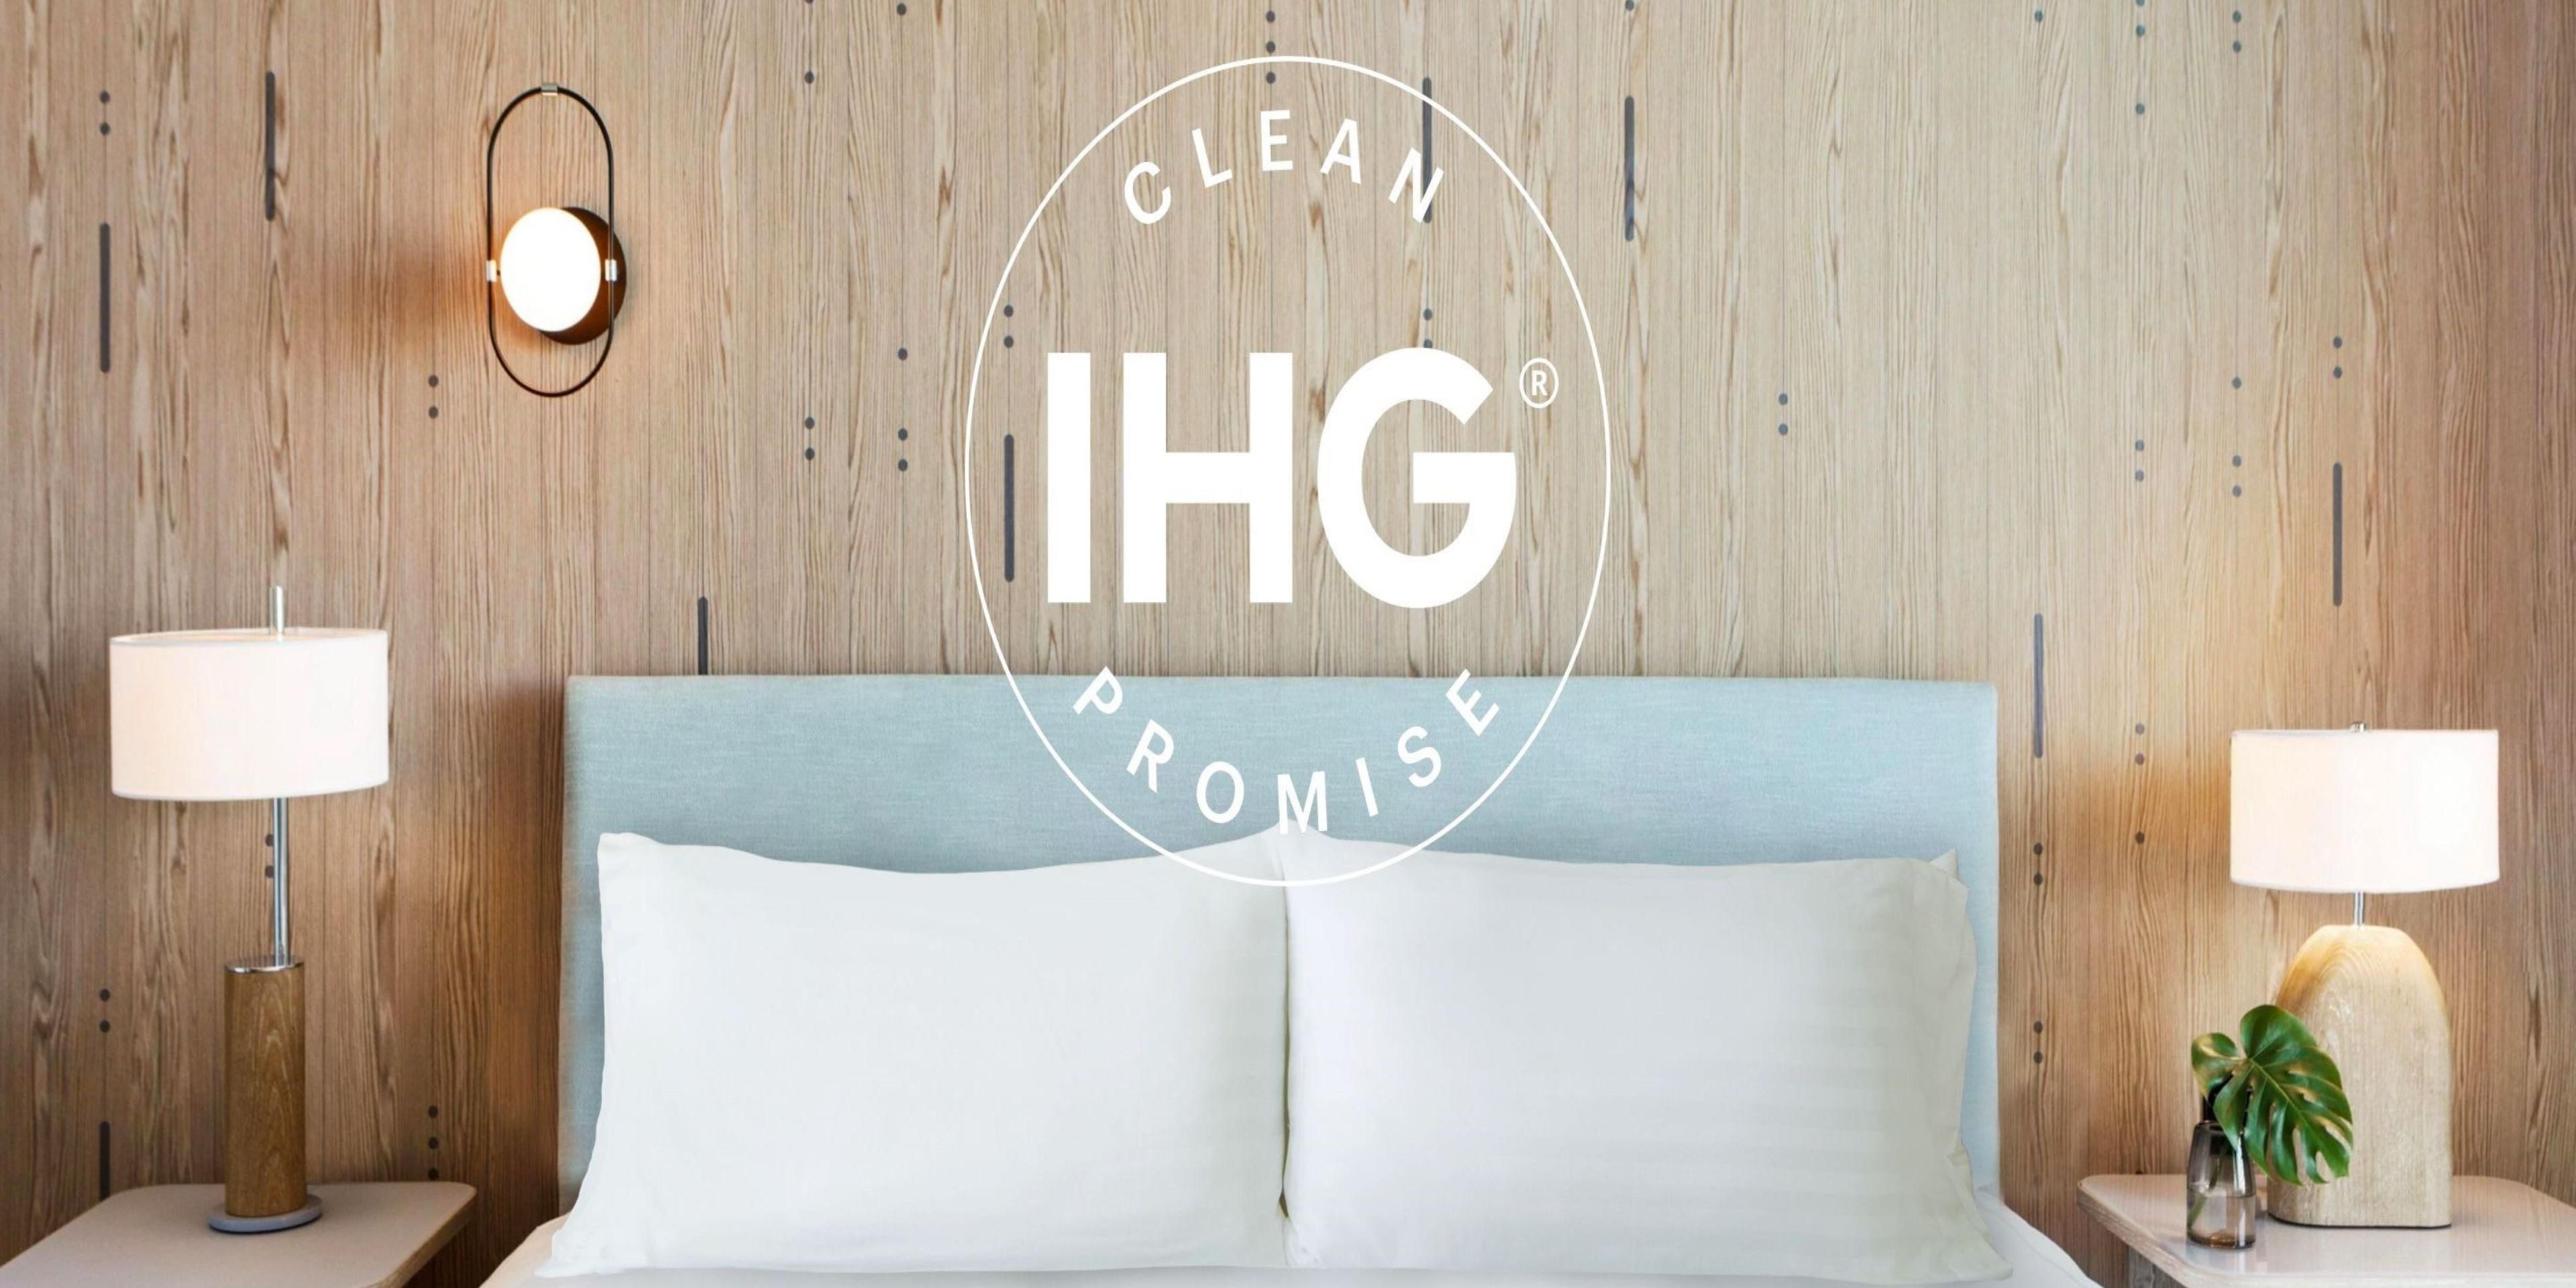 IHG has a long-standing commitment to rigorous cleaning procedures. This IHG Way of Clean program is now being expanded with additional Covid-19 protocols and best practices. Click to learn about our clean standards.